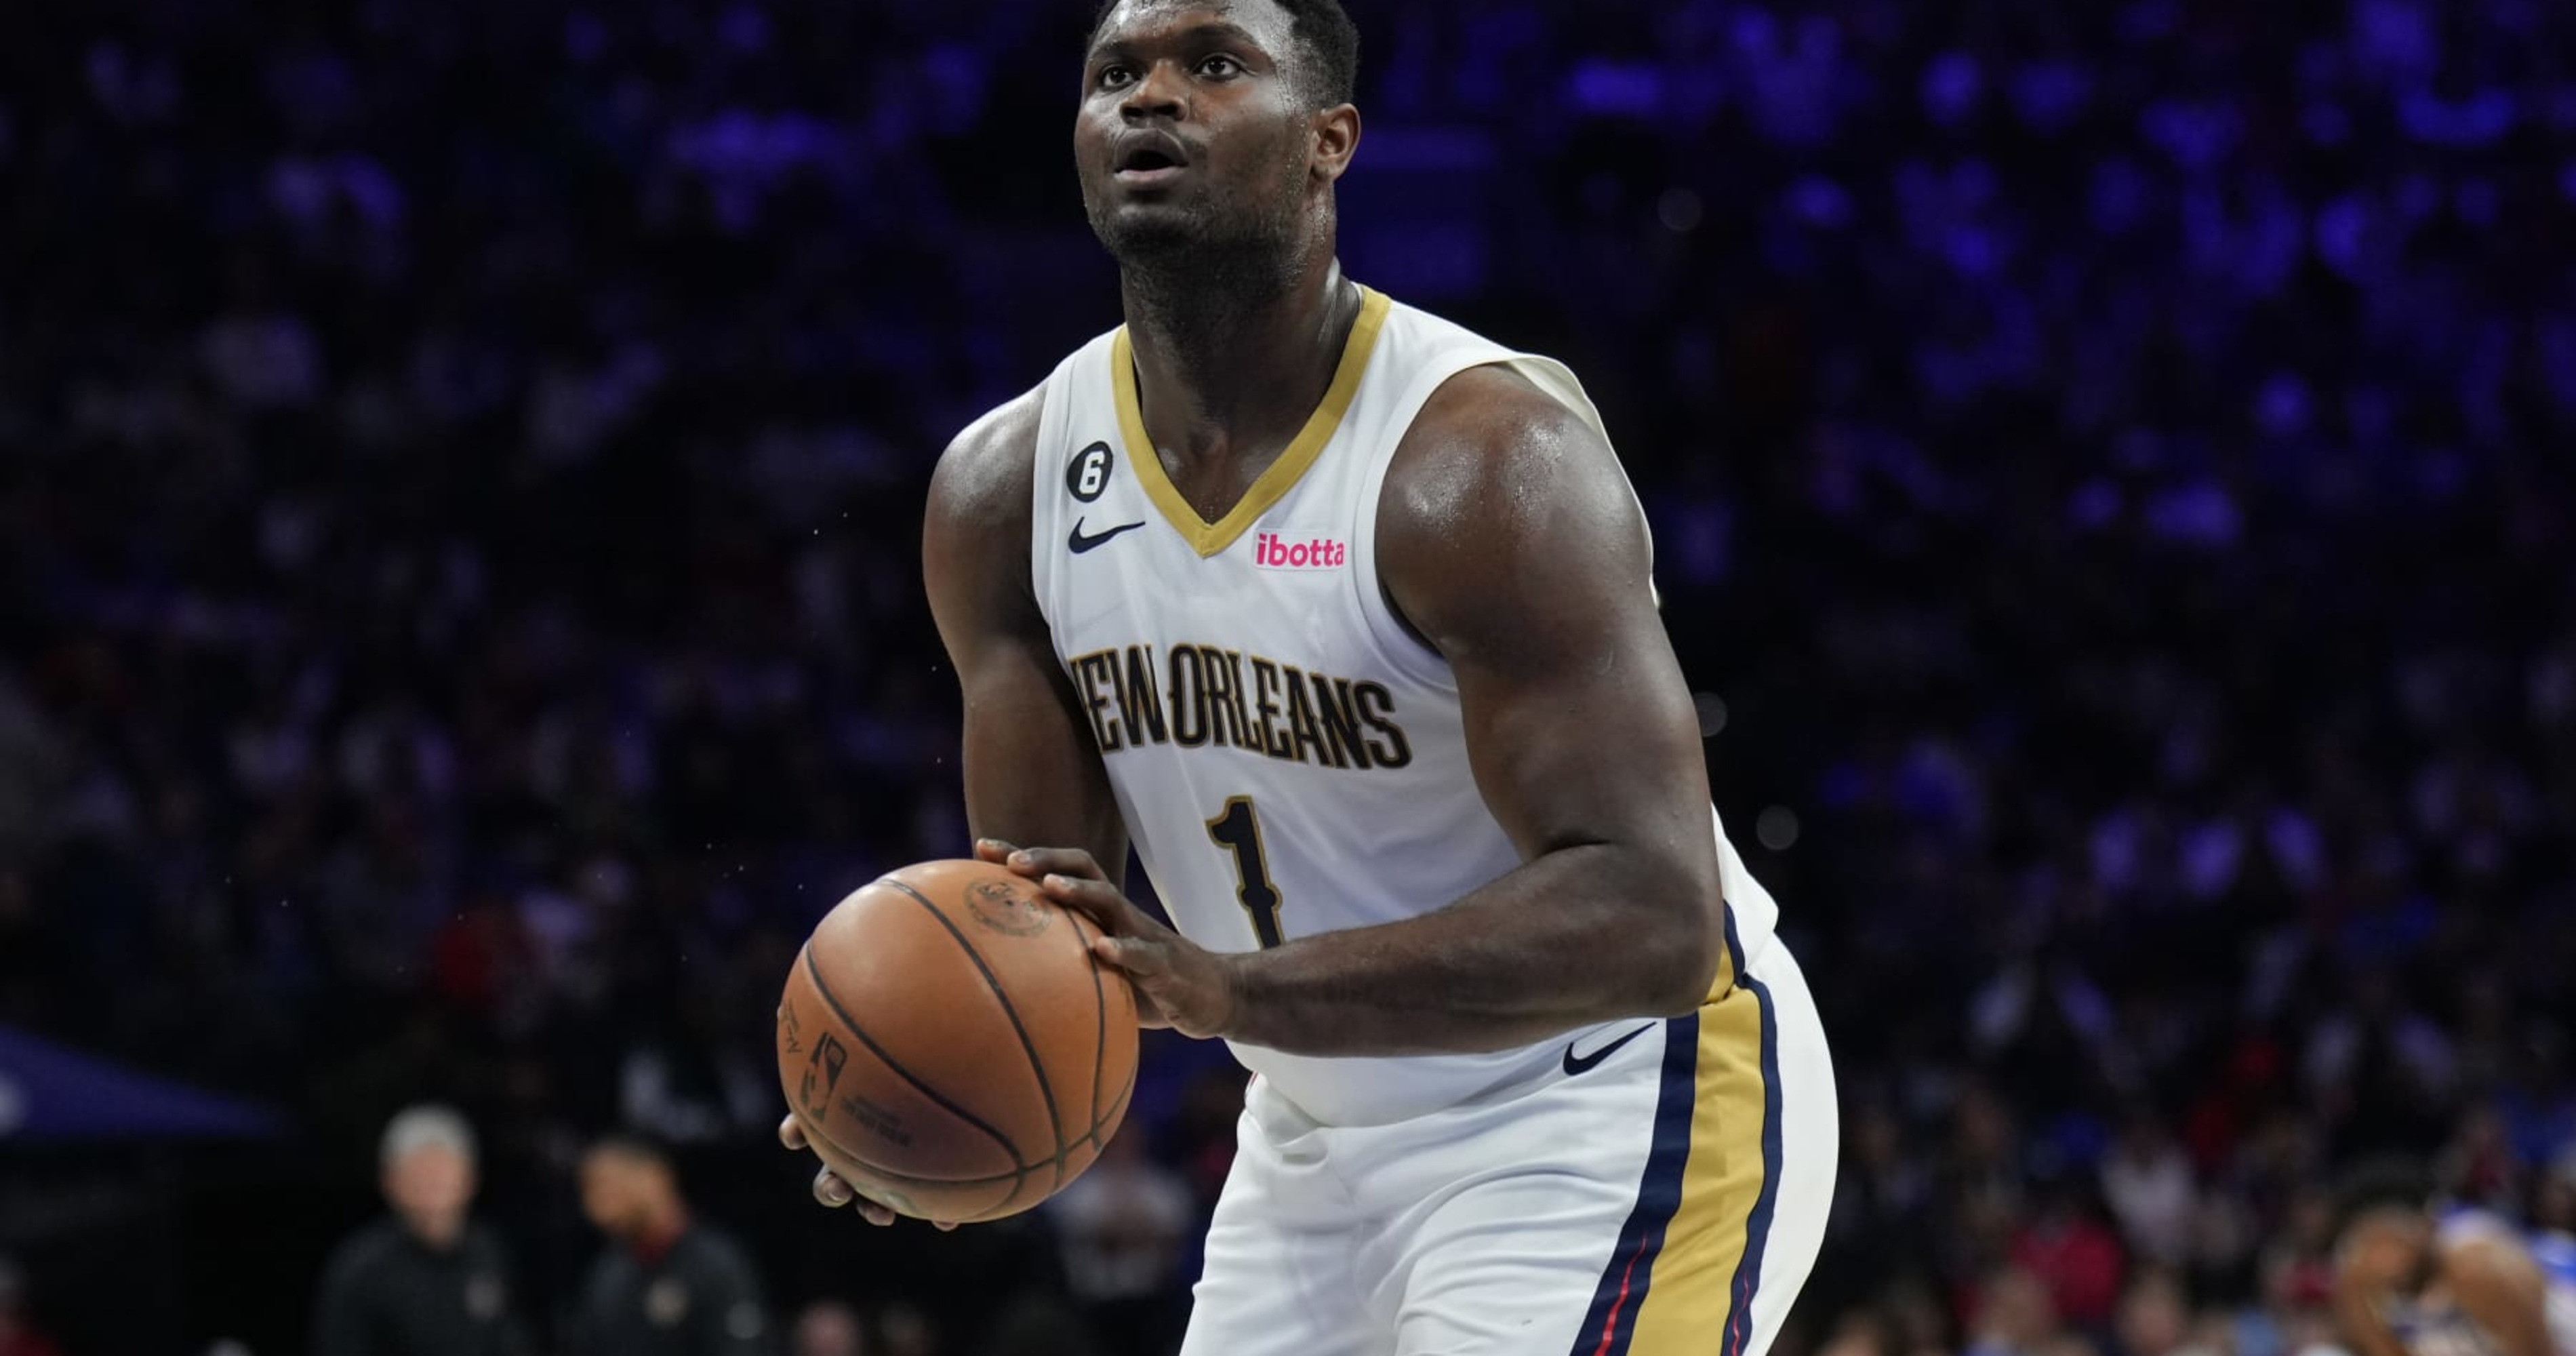 4 early 2023 NBA Draft targets for Hawks with No. 15 pick